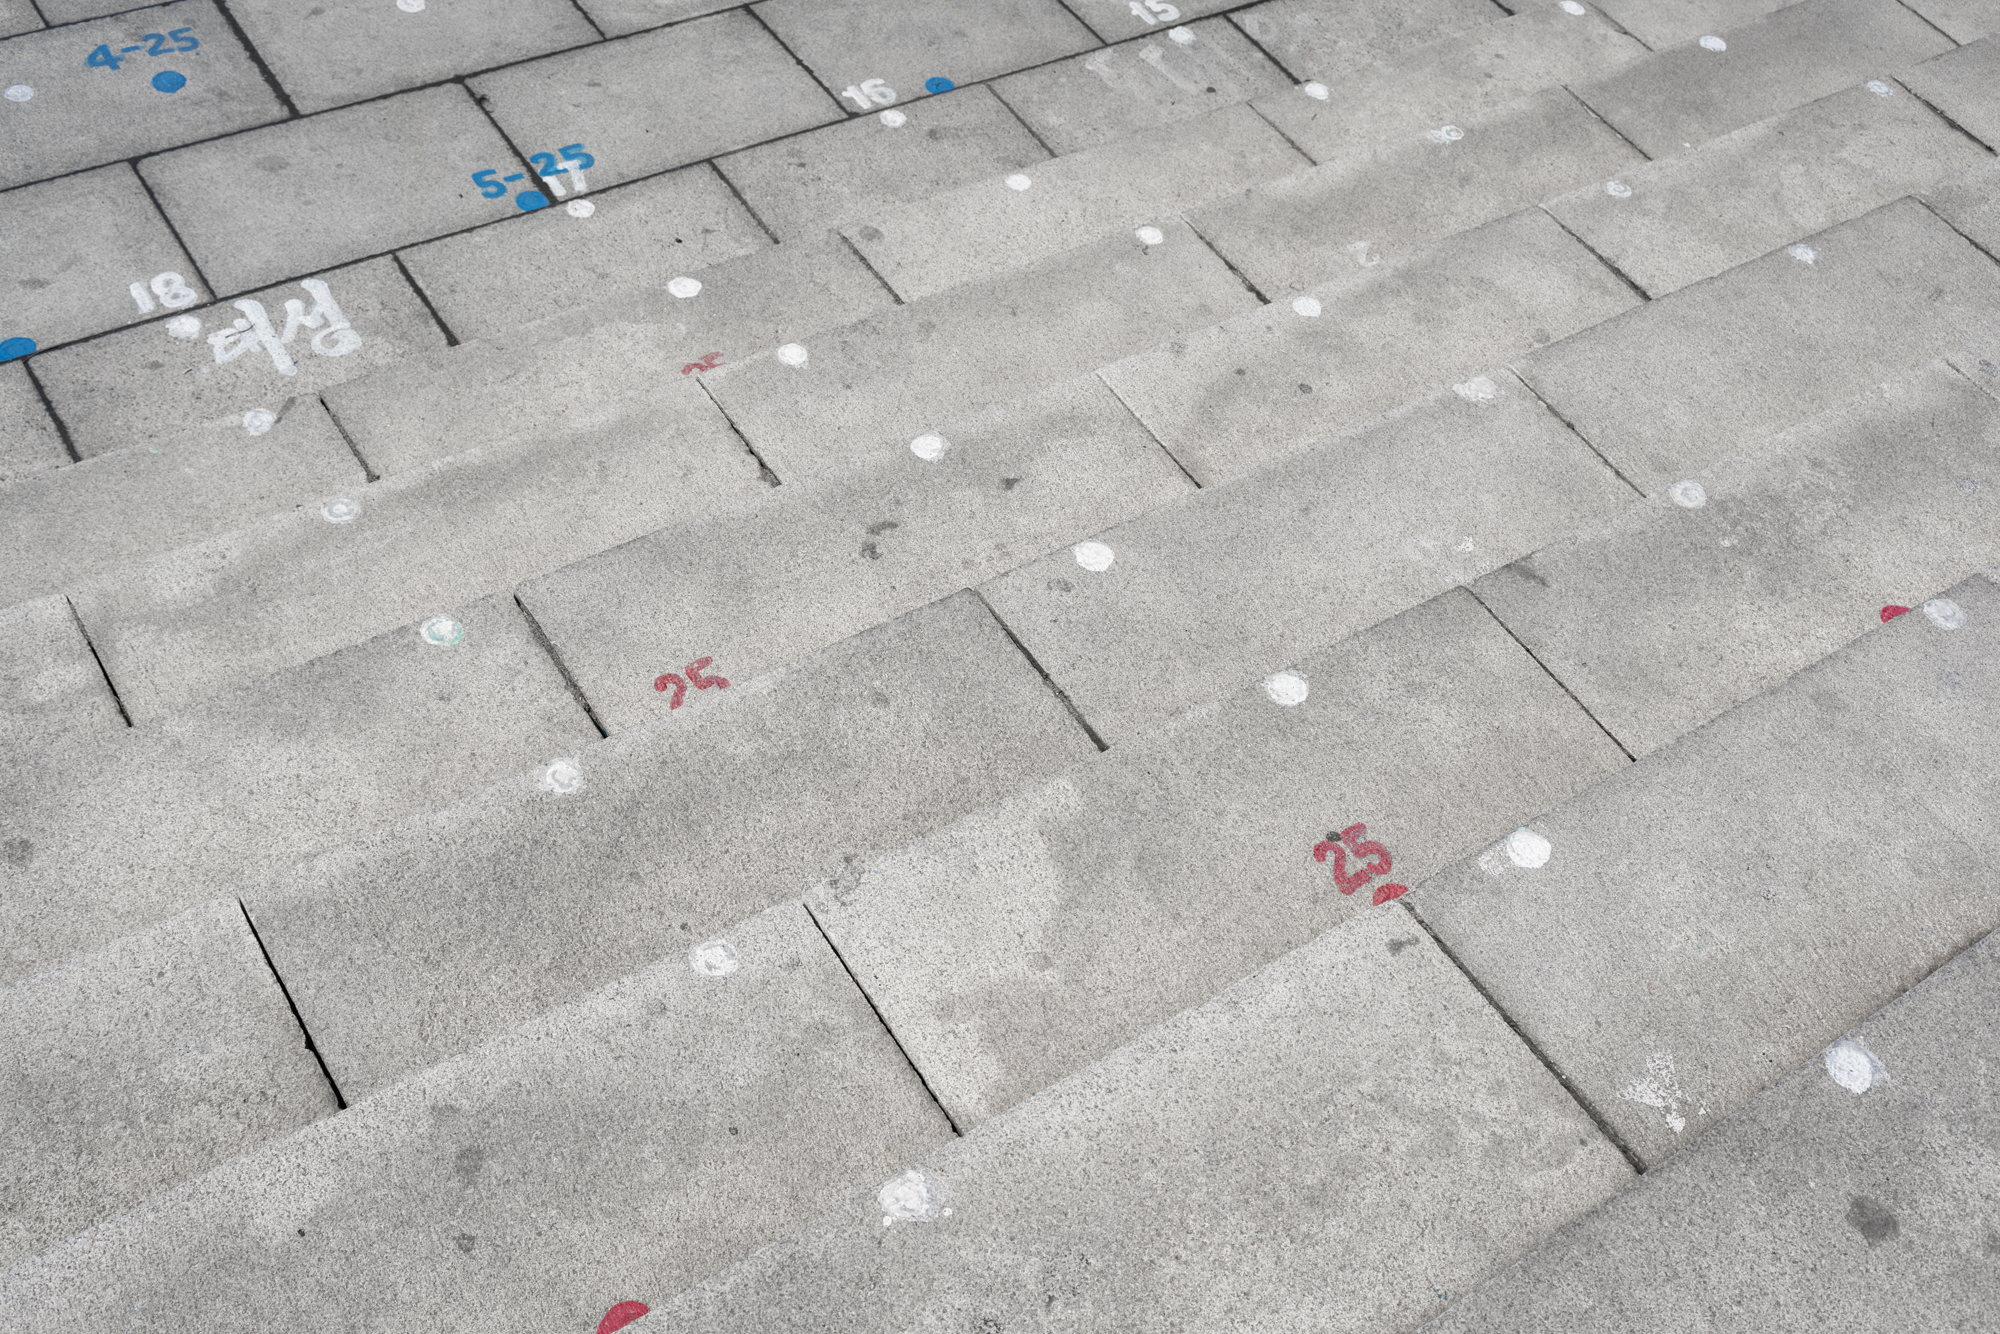  Markings on the floor of Kim II sung Square are used to guide positioning of parades and synchronised displays. 